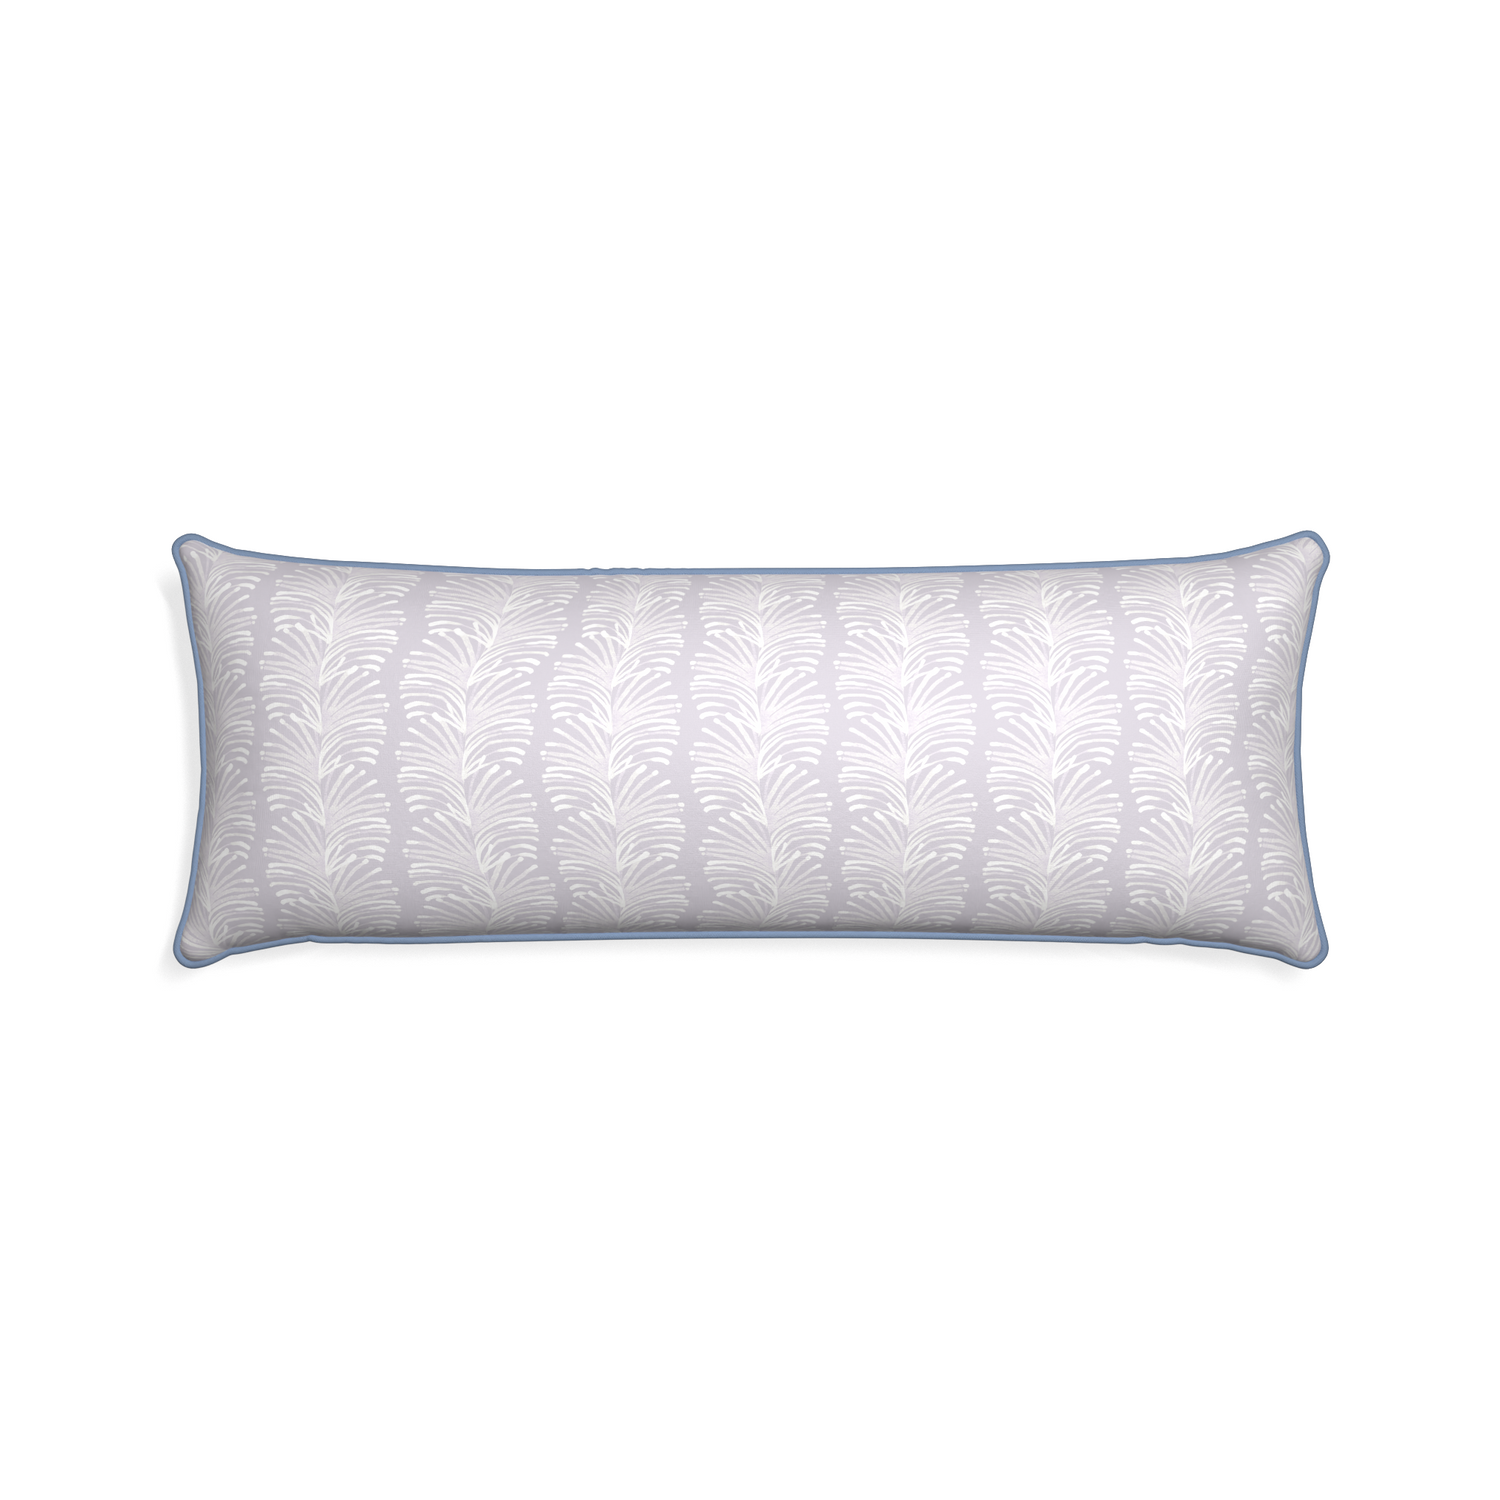 Xl-lumbar emma lavender custom lavender botanical stripepillow with sky piping on white background